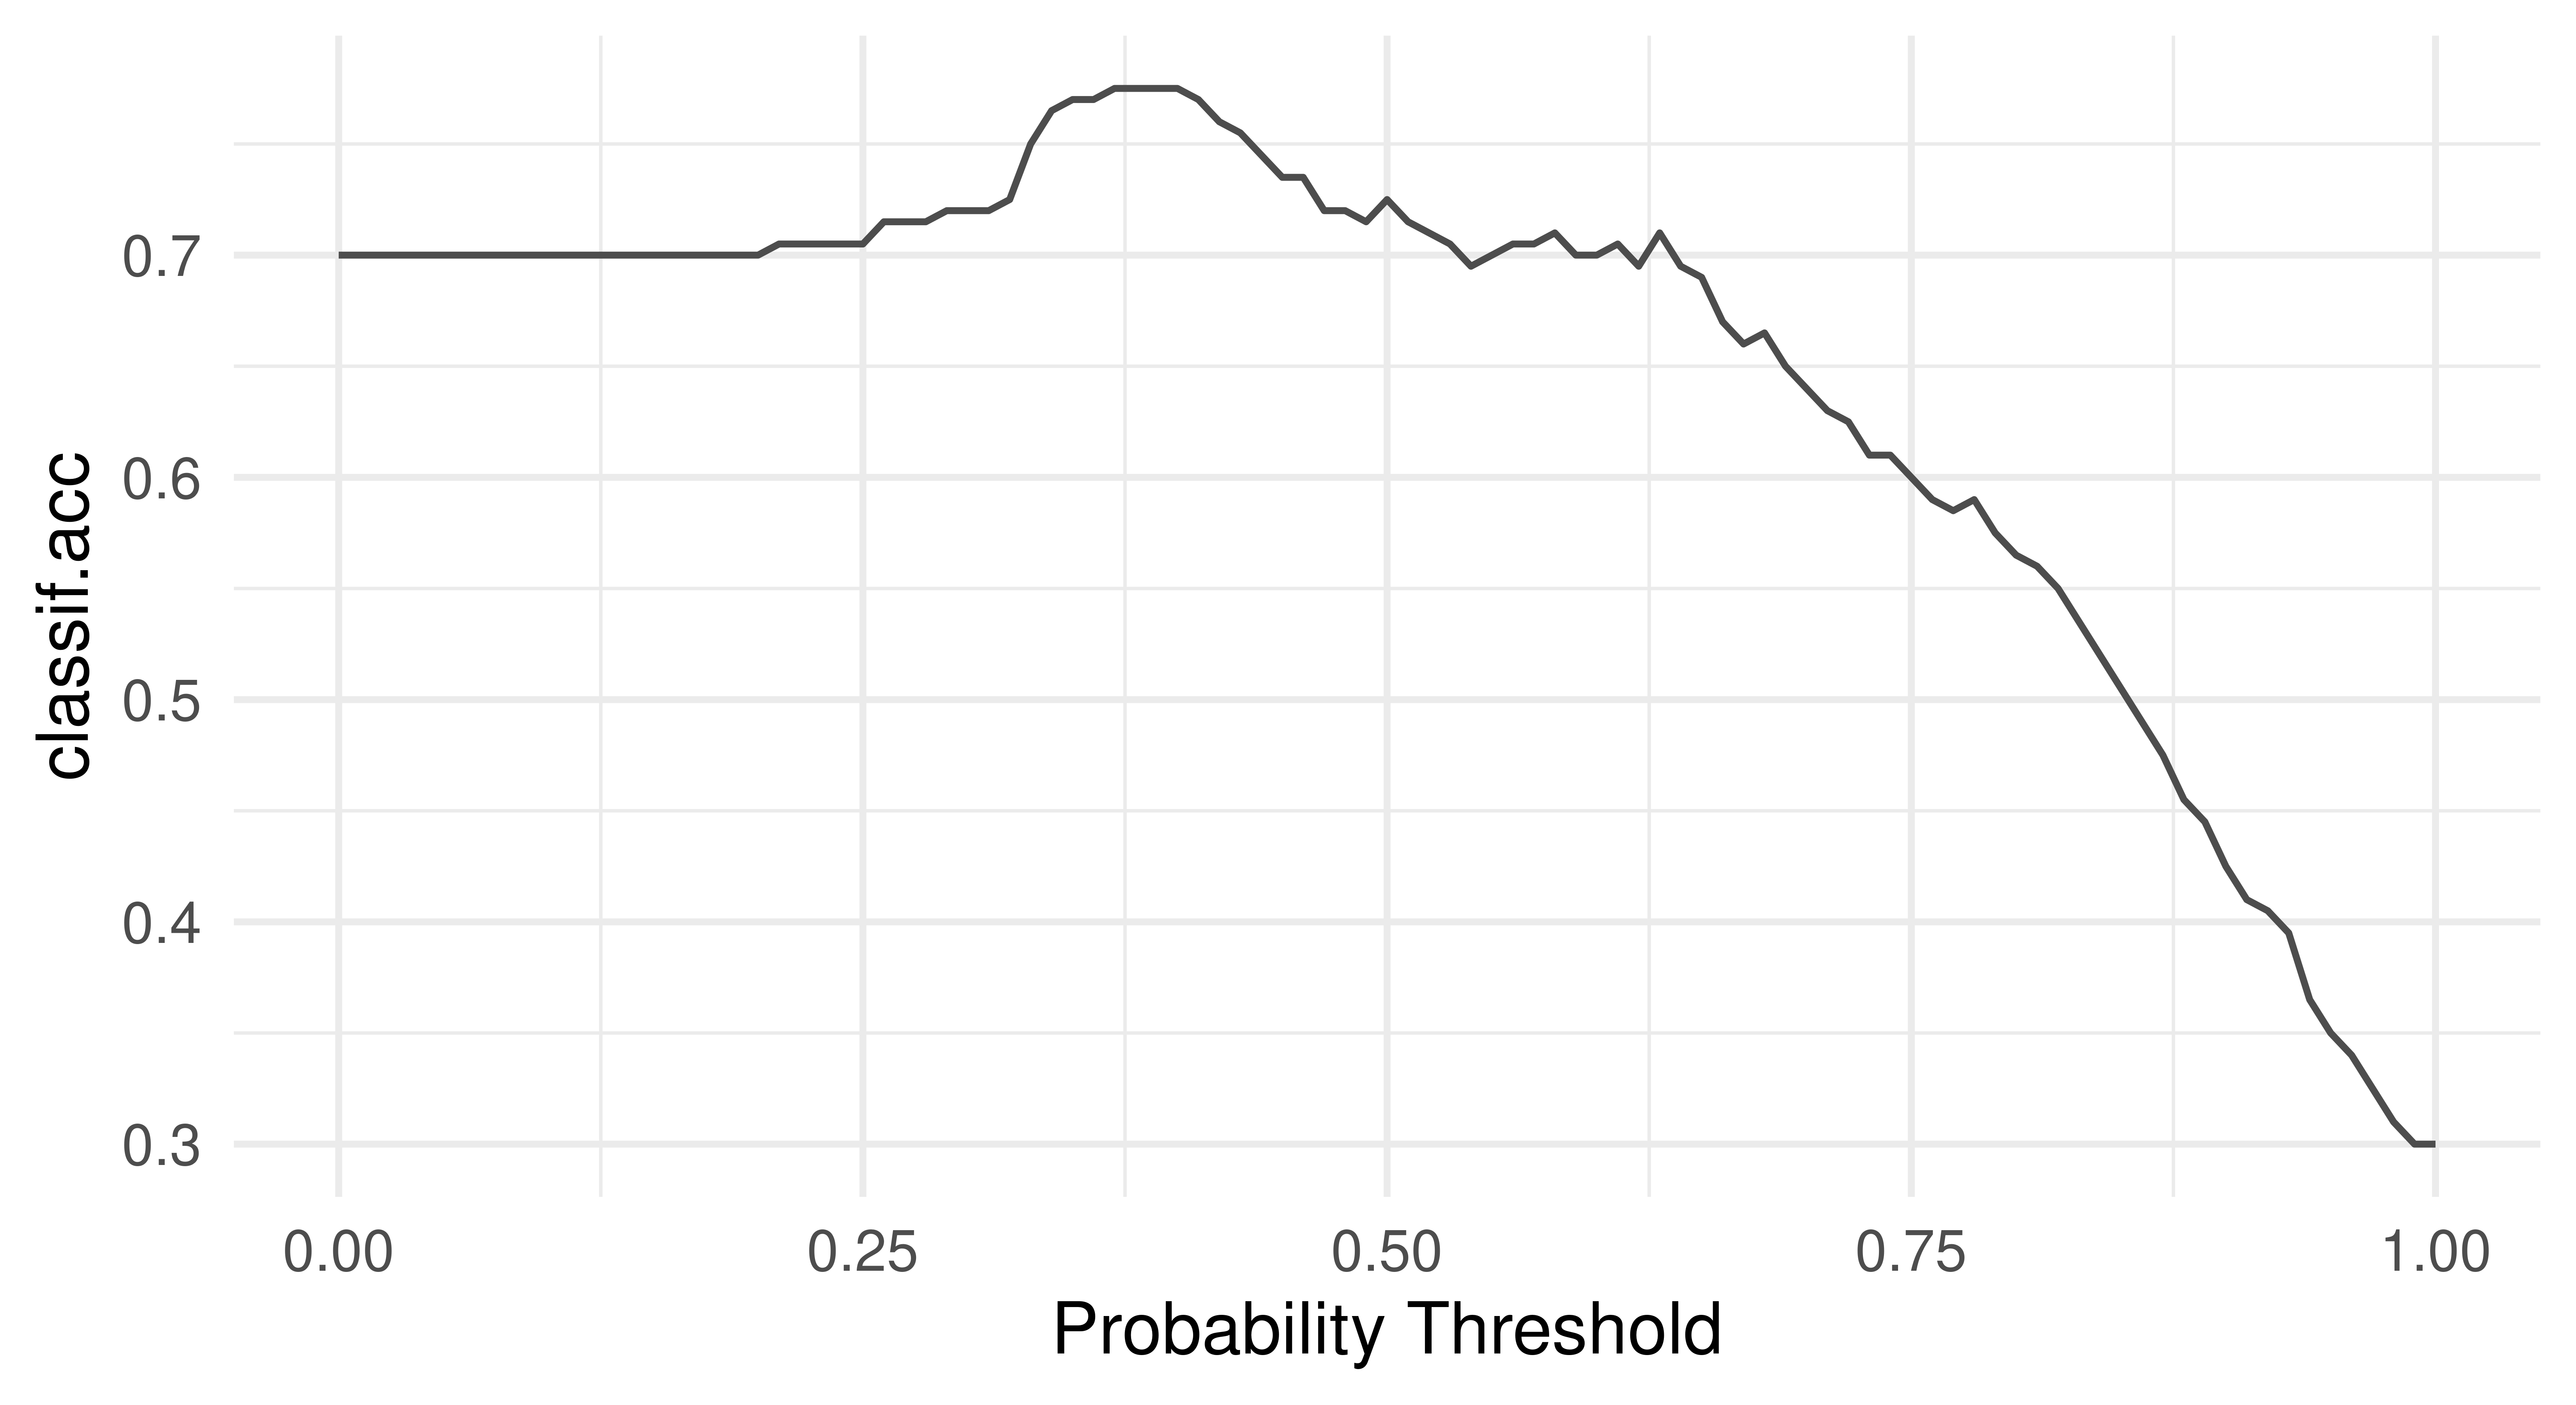 Two line graphs, both with "Probability Threshold" on x-axis from 0-1. Left: "classif.fpr" on y-axis. Line slowly decreases from (0,1) to (1,0). Right: "classif.acc" on y-axis. Line travels from (0,0.7) to (0.25,0.7) to (0.4,0.75) to (1, 0.3).